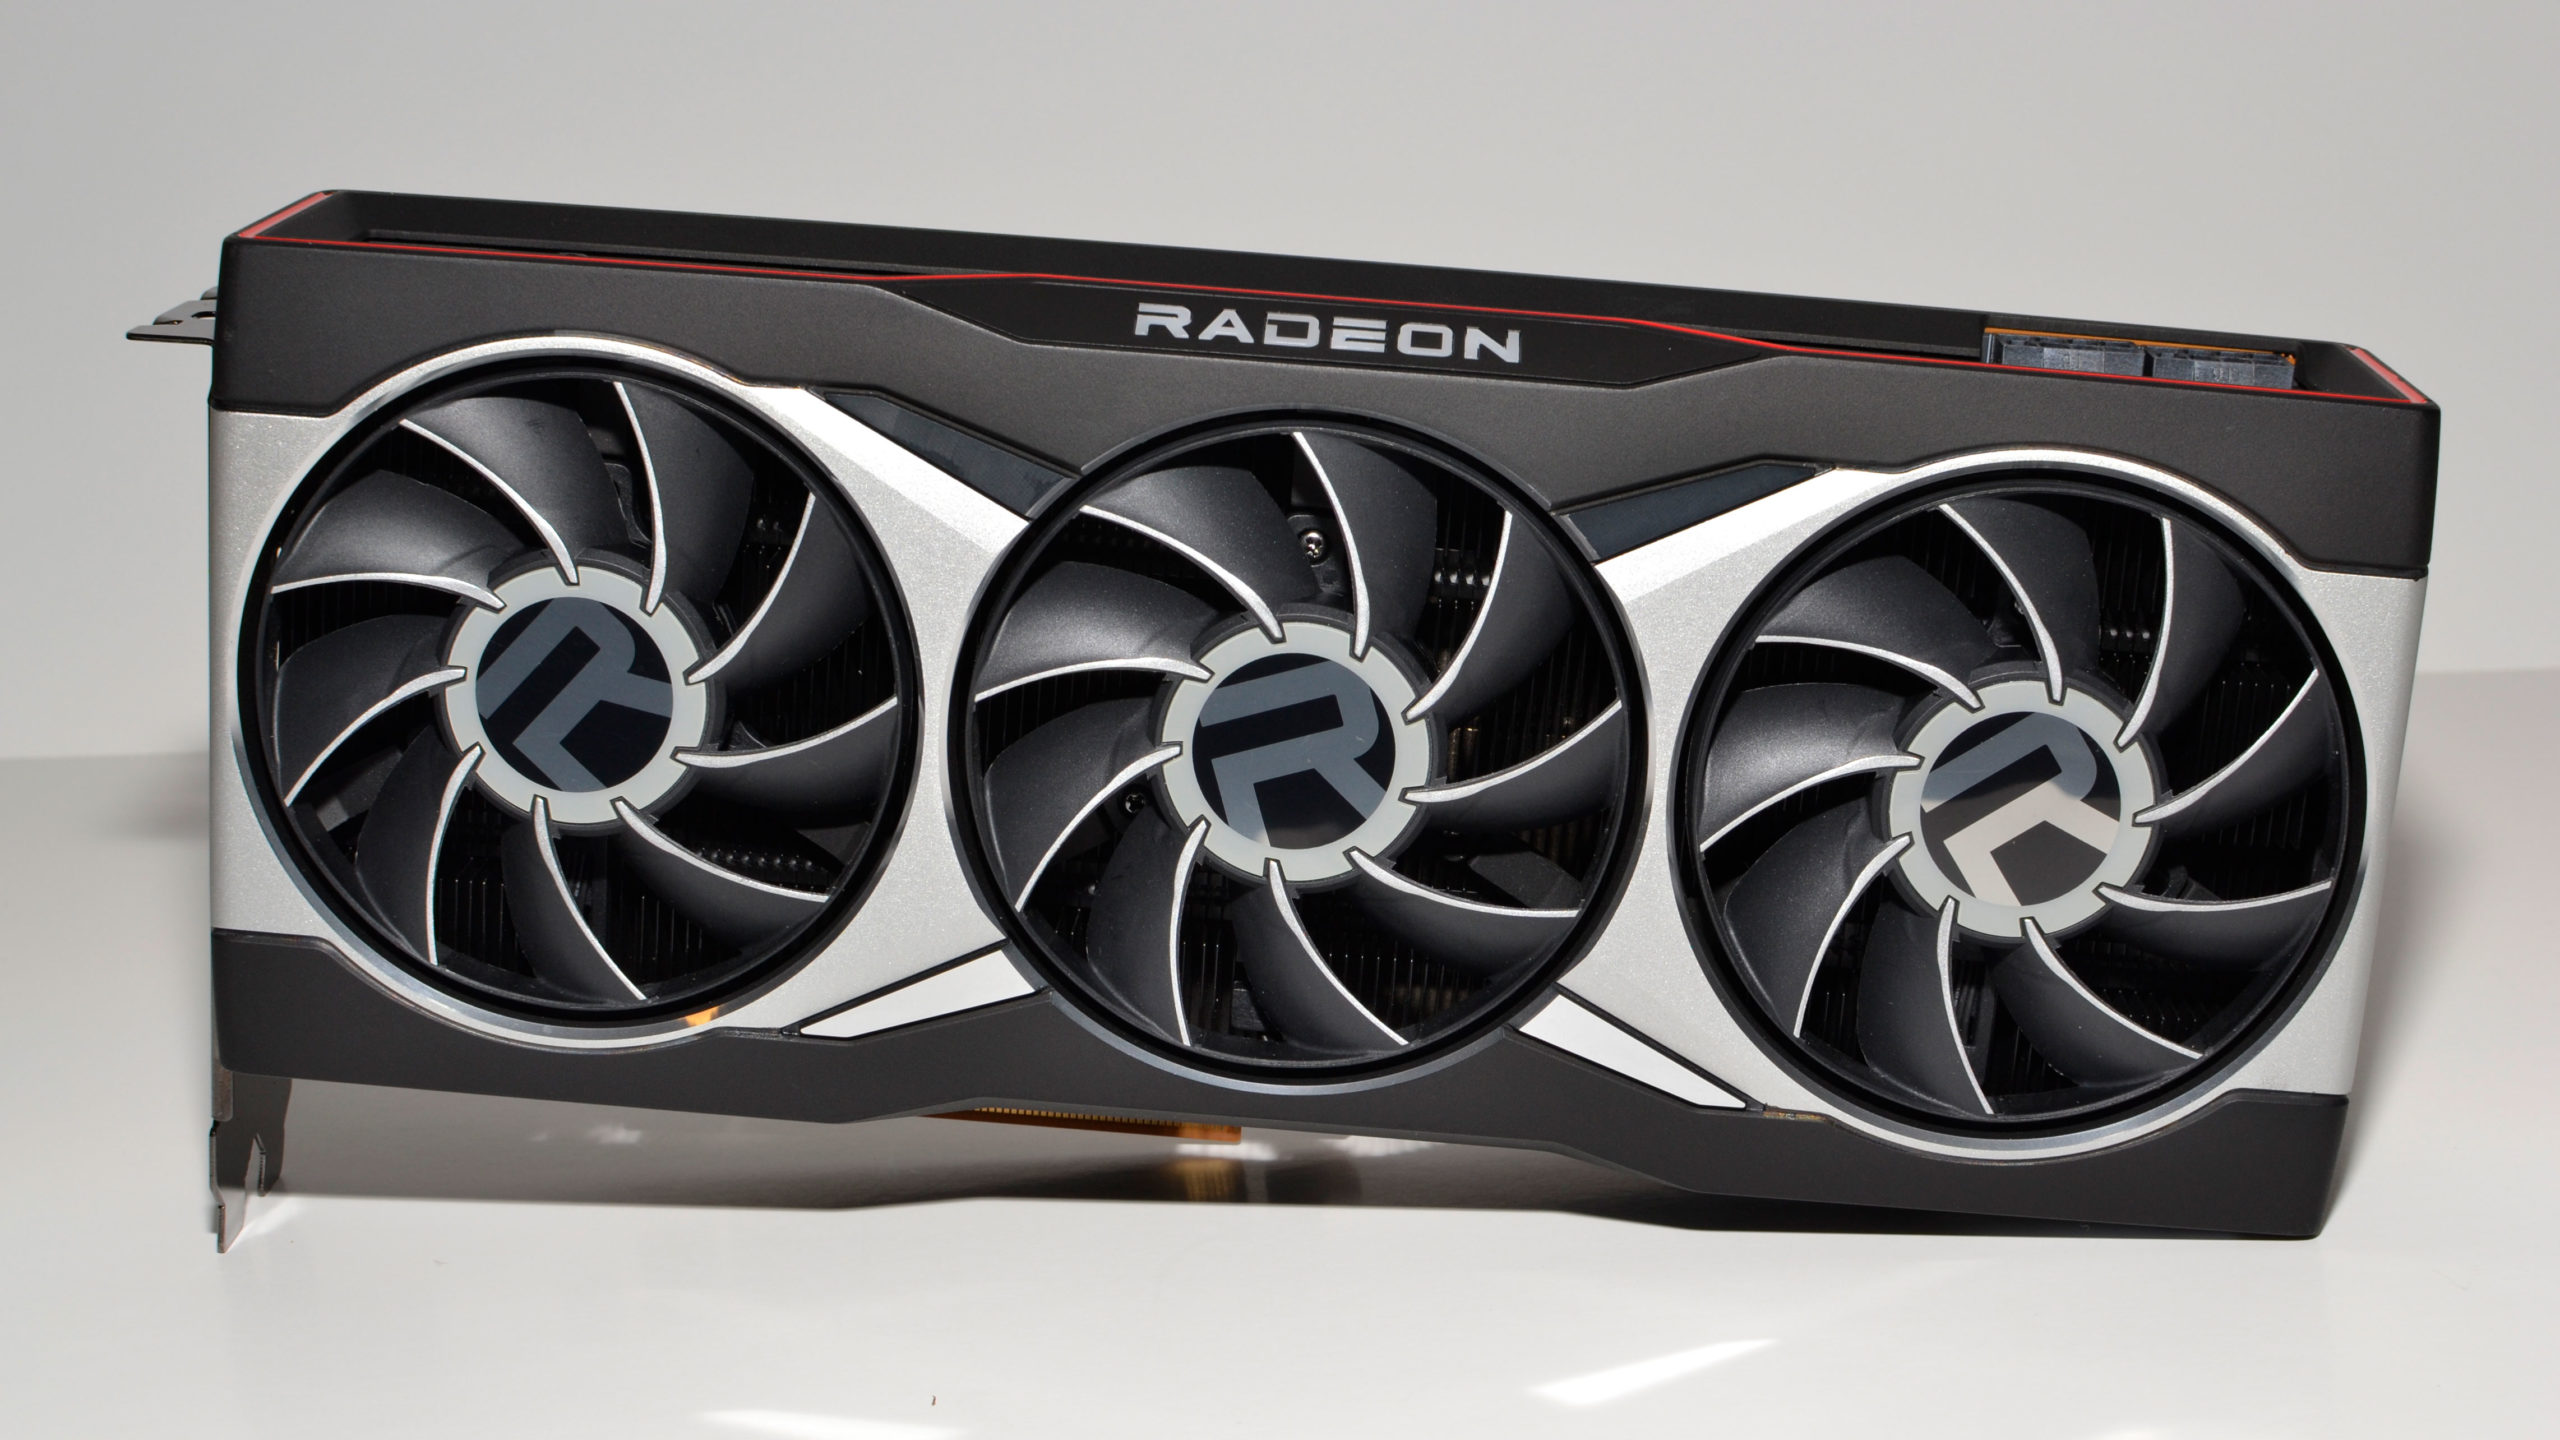 amd-radeon-rx-6800-xt-and-rx-6800-review:-nipping-at-ampere’s-heels